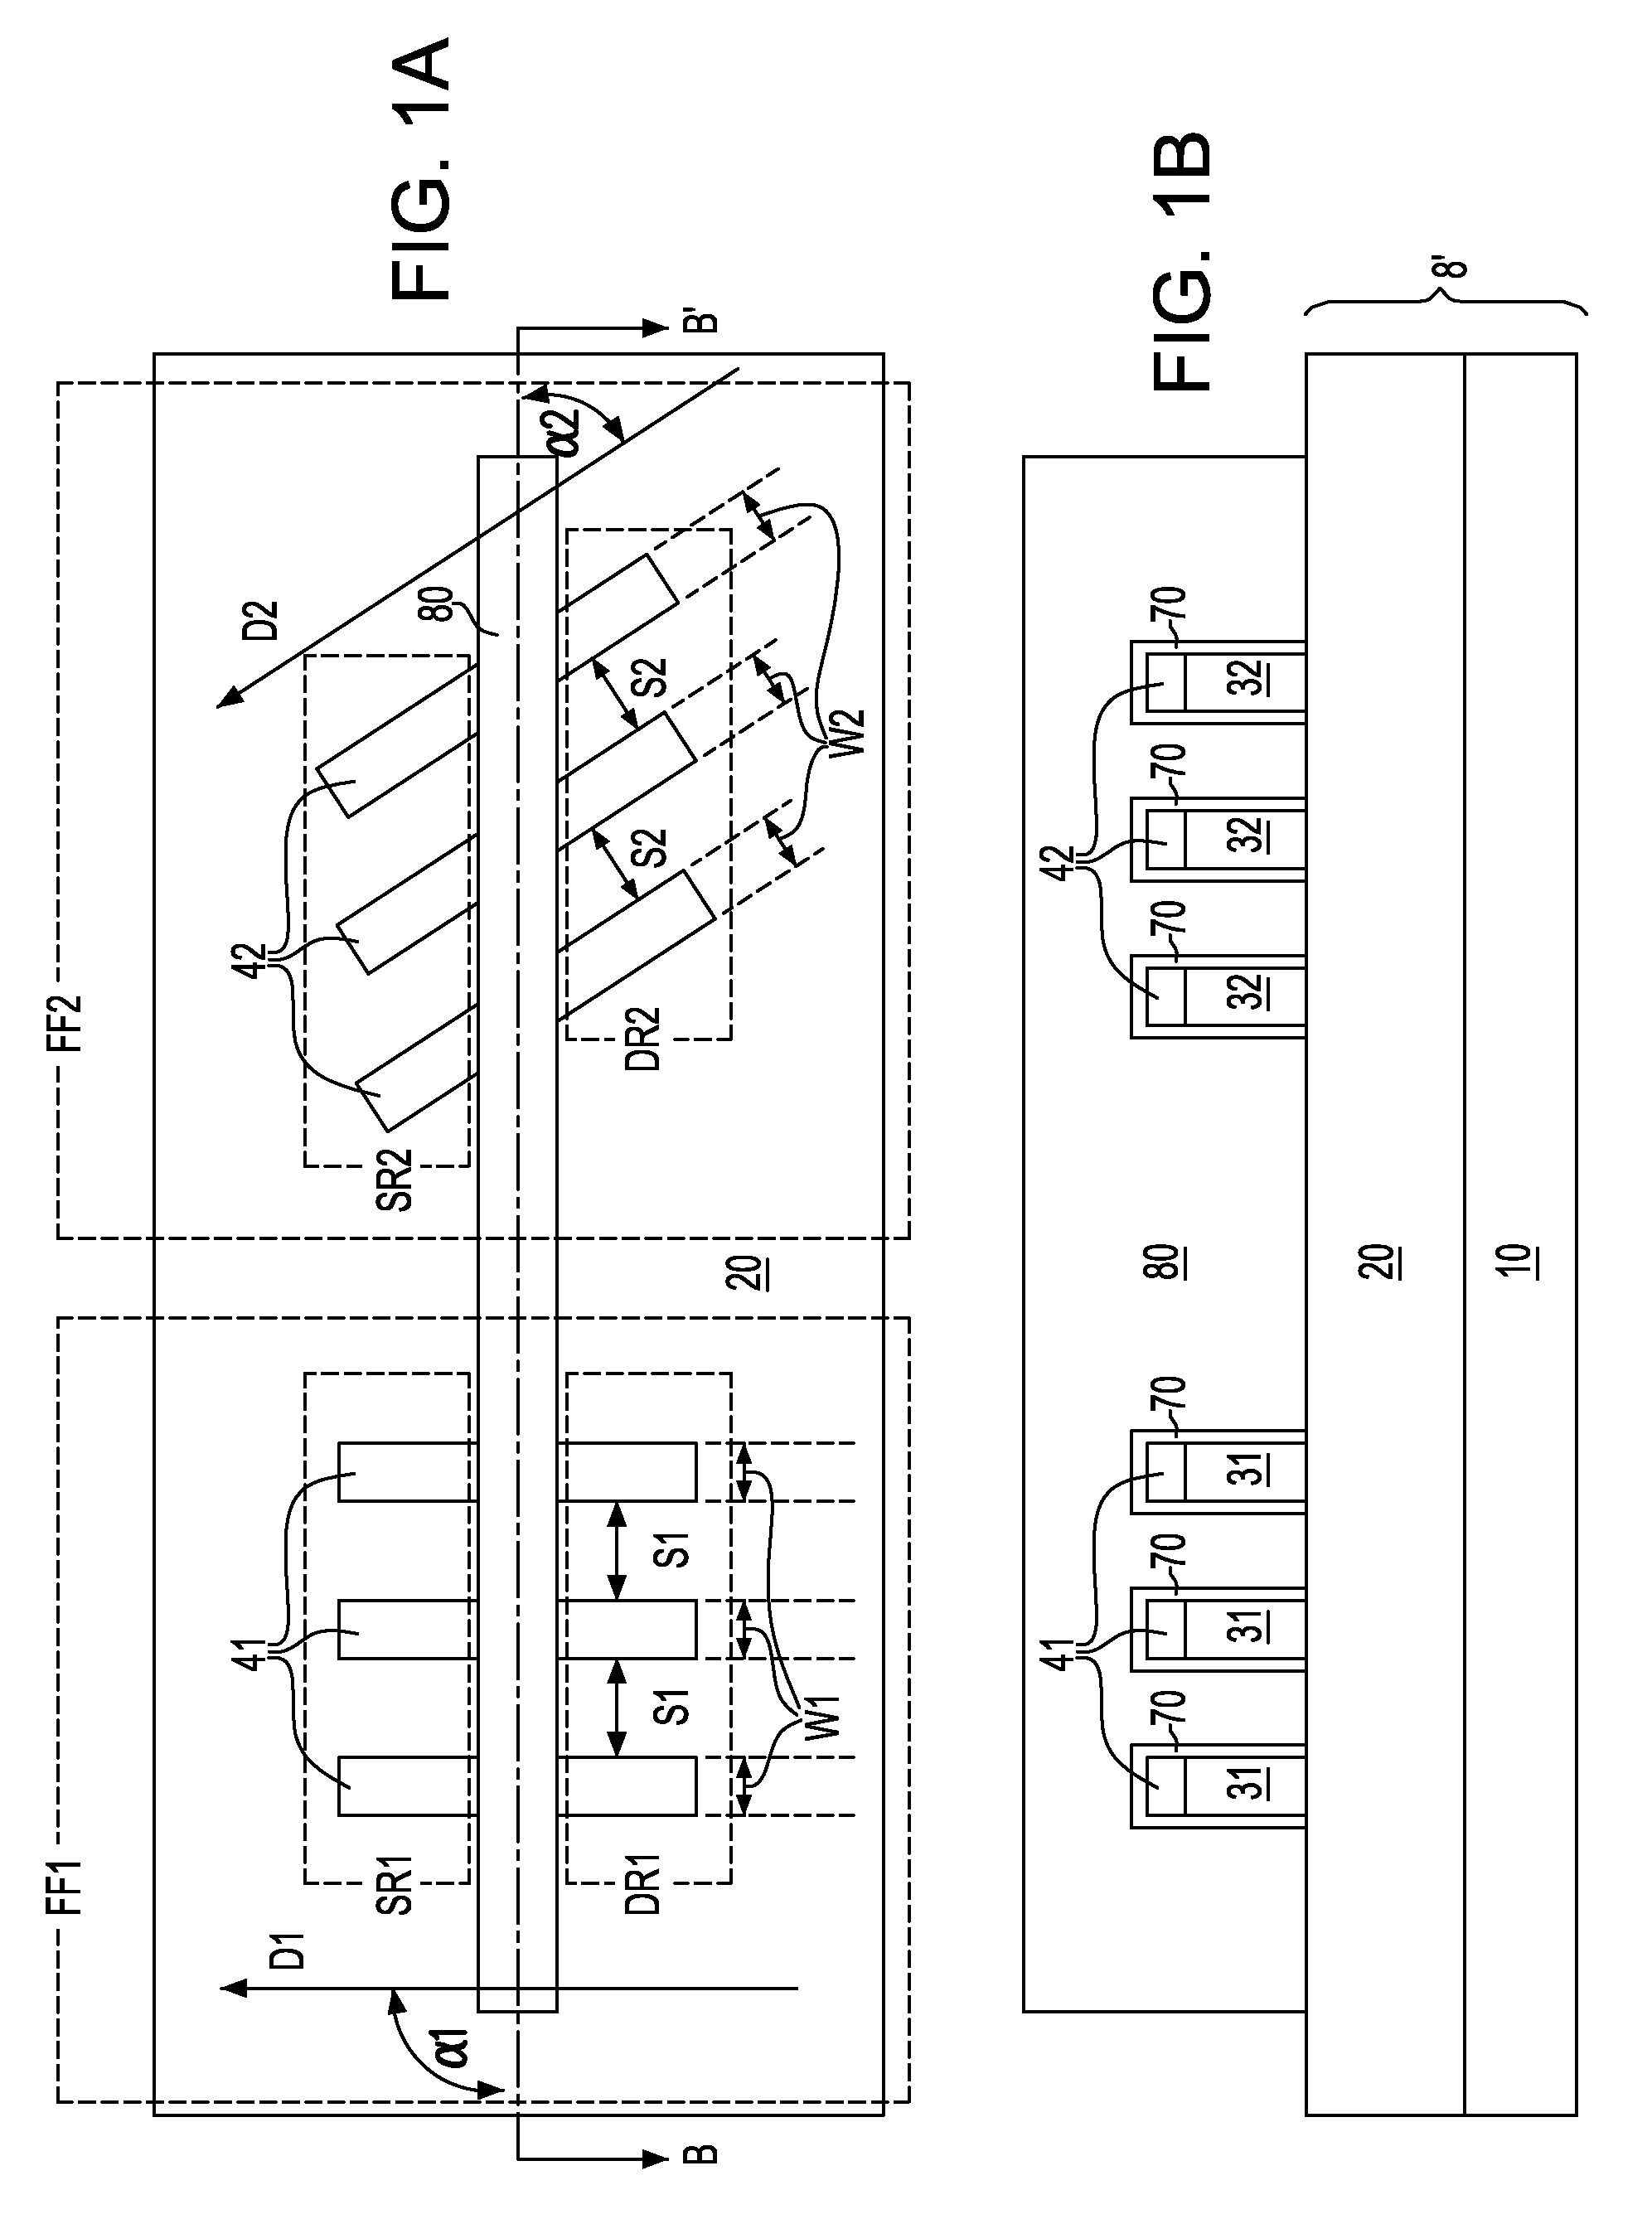 Finfet with sublithographic fin width